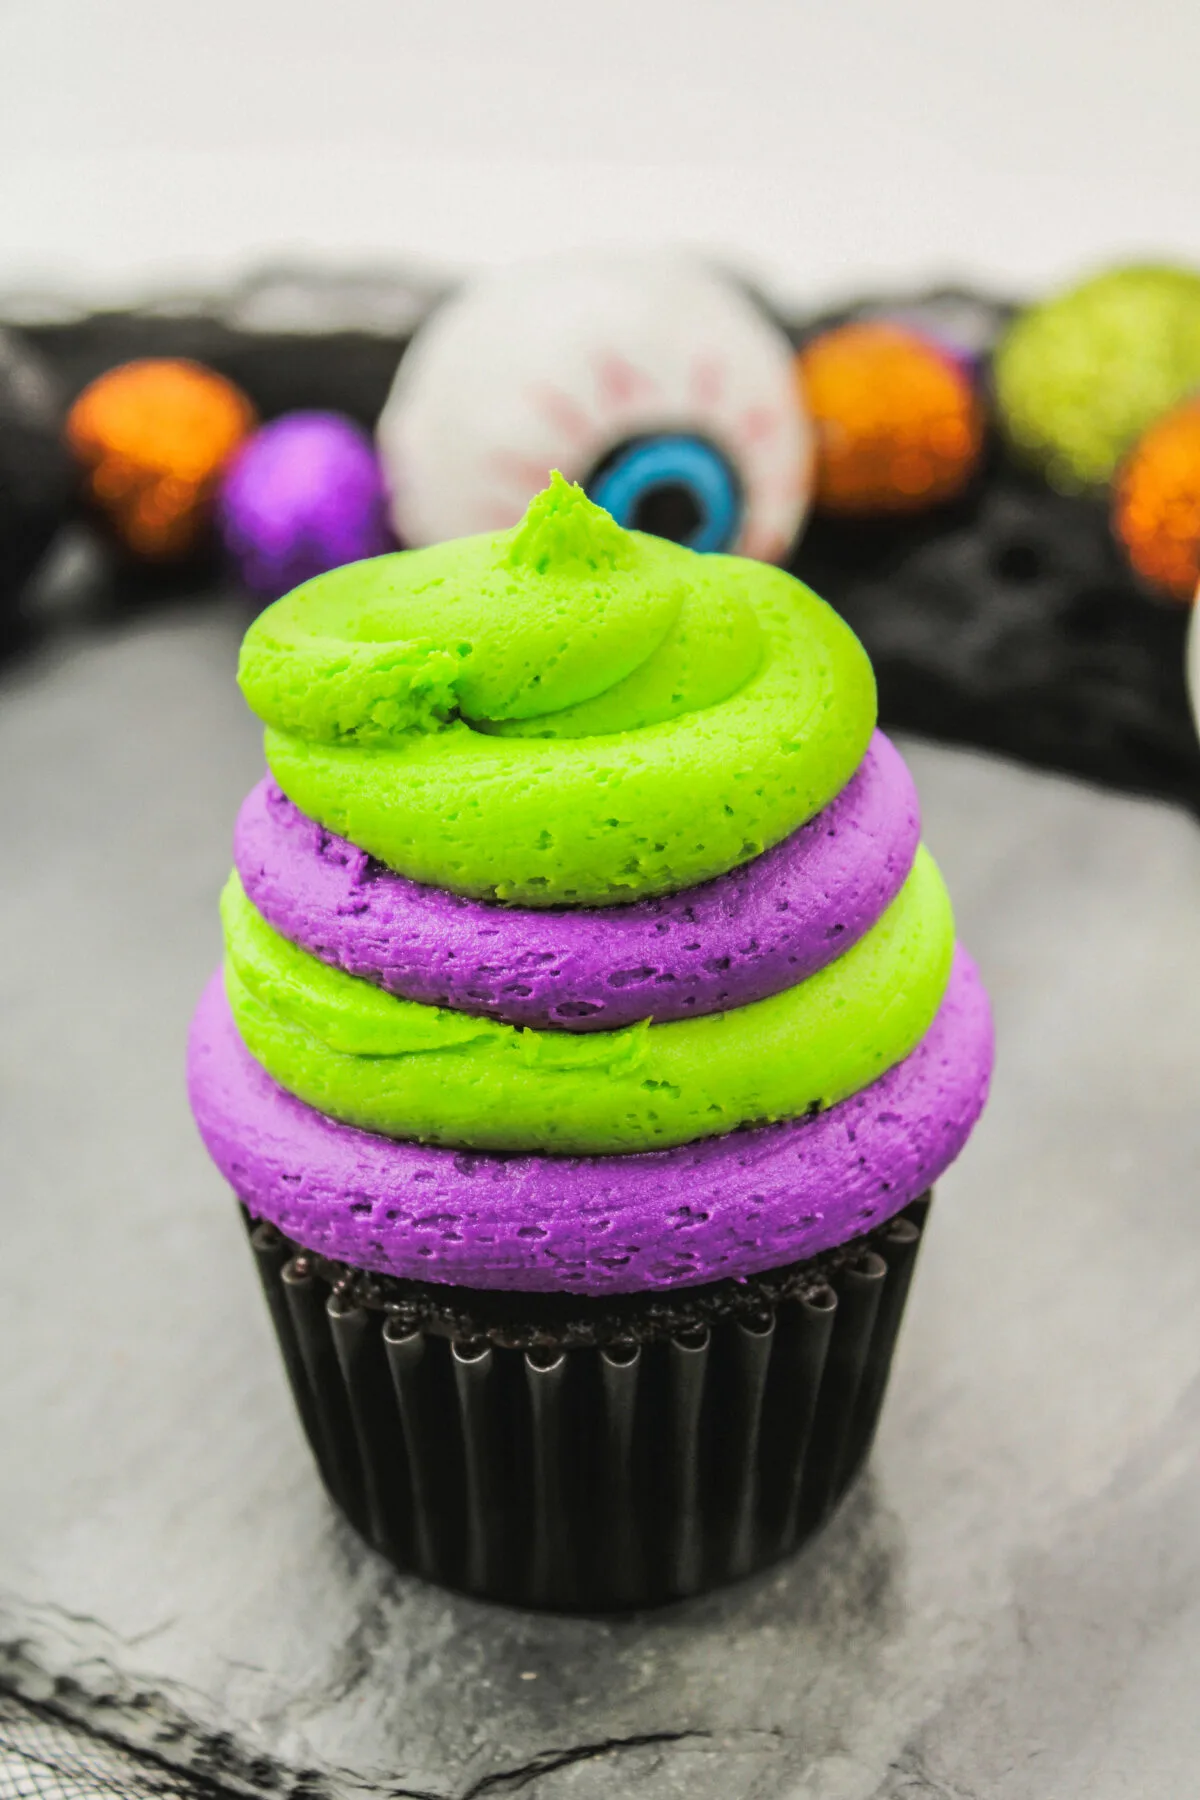 Cupcake with layers of purple and green frosting,